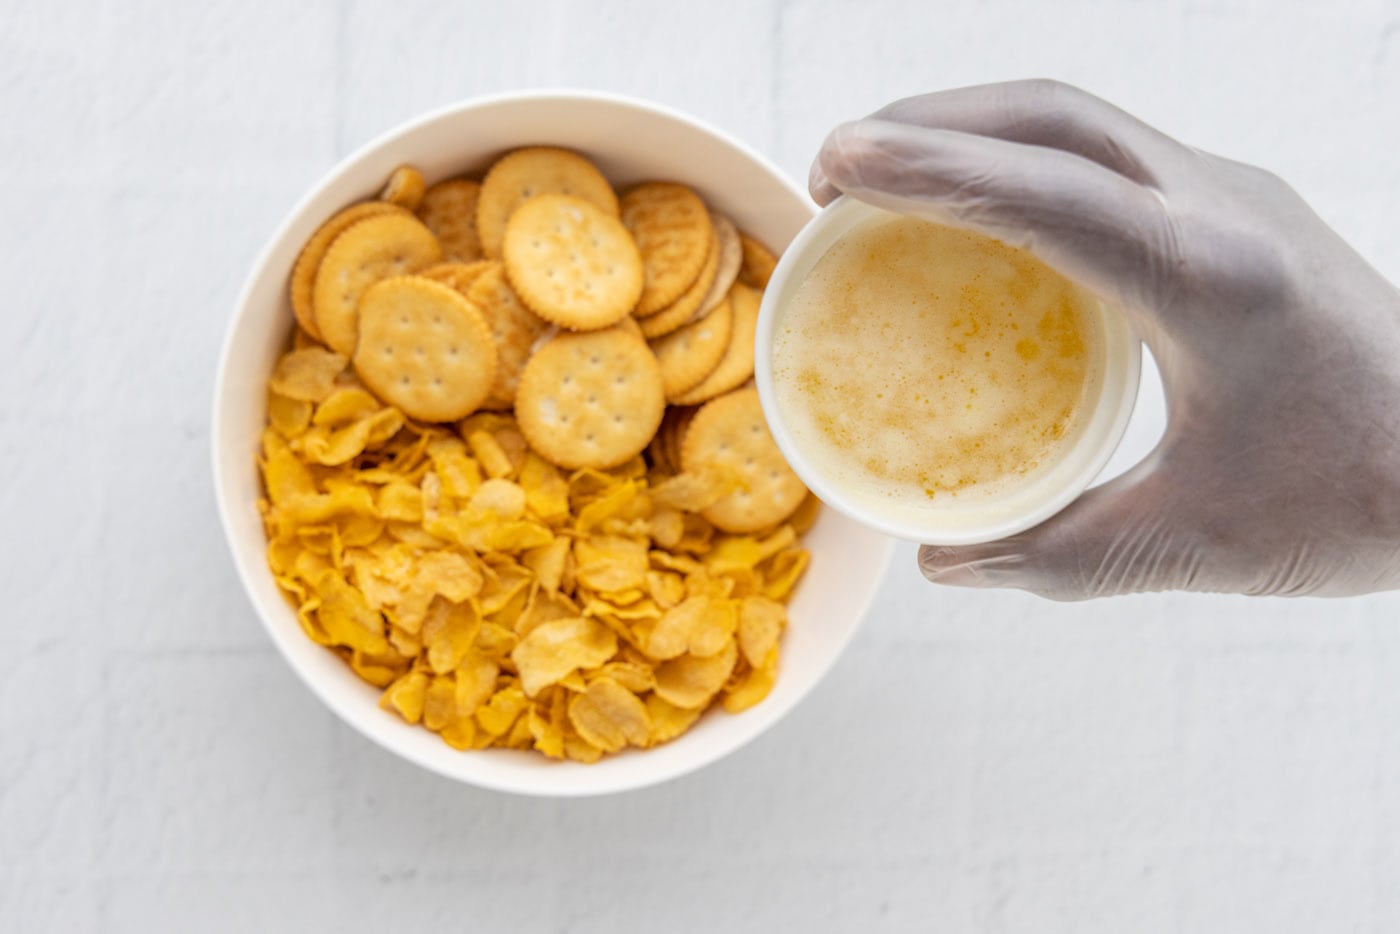 ritz crackers and cornflakes in a bowl with melted butter